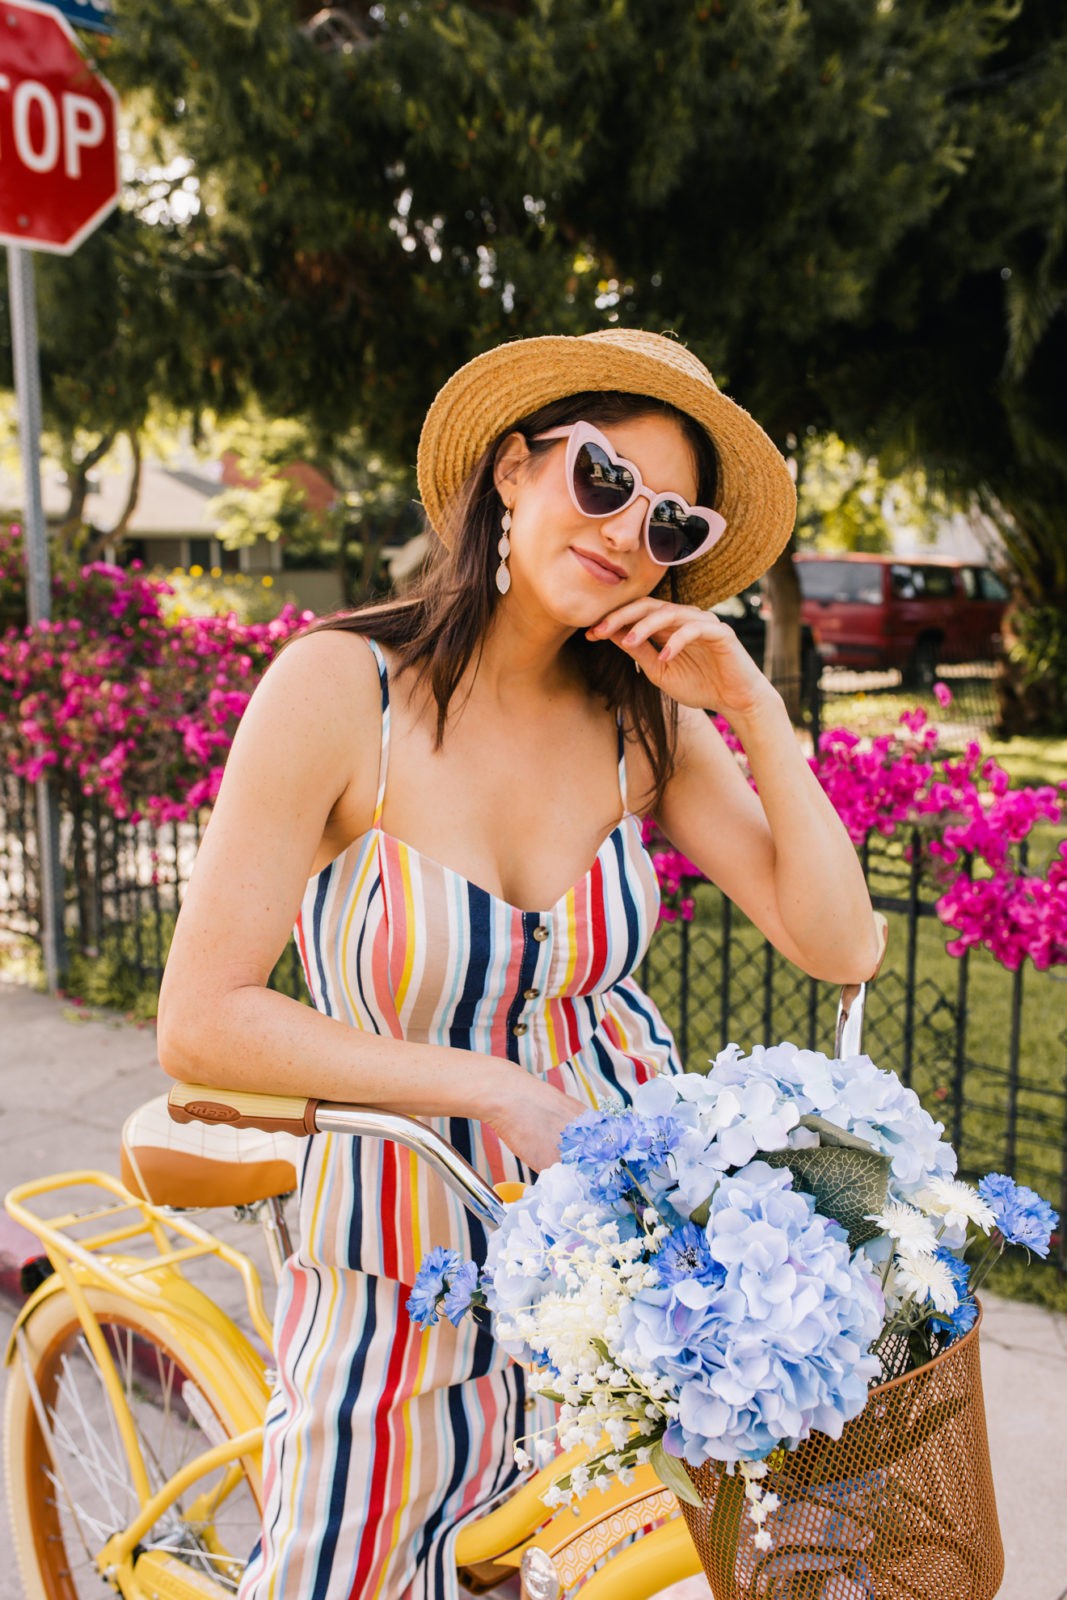 Stage Summer Moments, 2019 Summer Bucket List Moments by popular Los Angeles Lifestyle Blogger Laura Lily: image of woman on Stage Stores yellow beach cruiser bike with bike basket full of flowers while wearing multi colored stripe spaghetti stripe dress, straw sun hat, and pink heart shaped sunglasses.